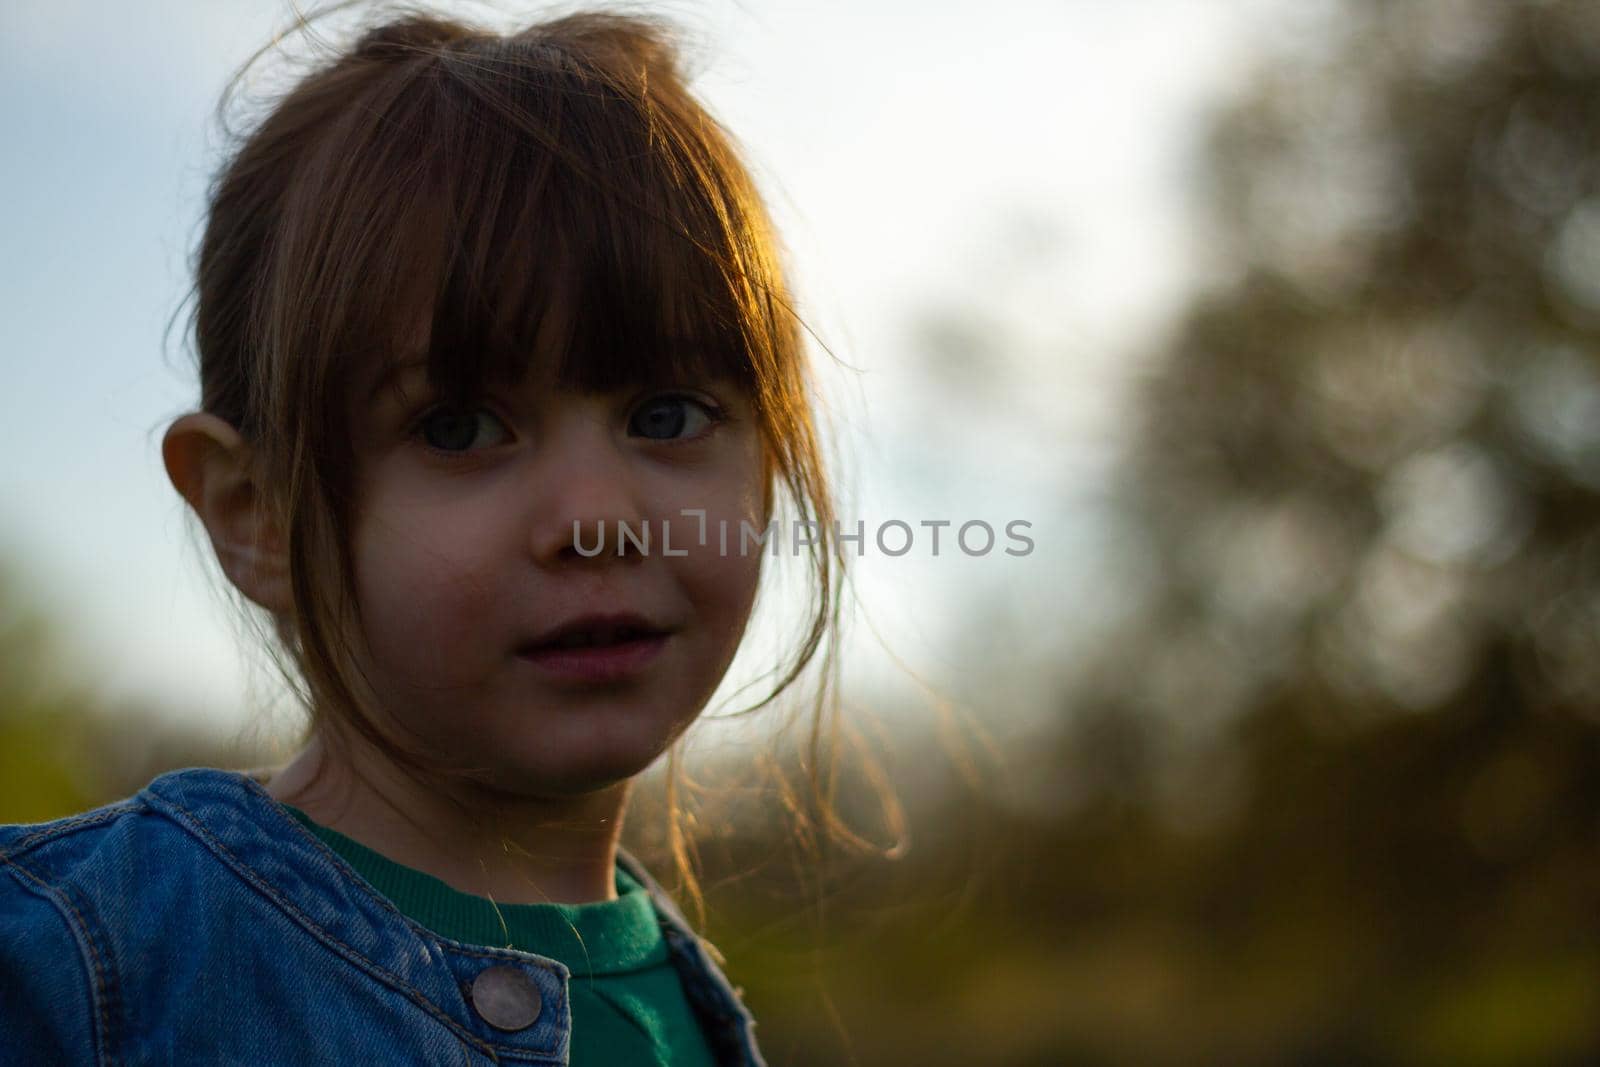 A Cute Baby Girl In A Park On A Sunny Day by AlbertoPascual